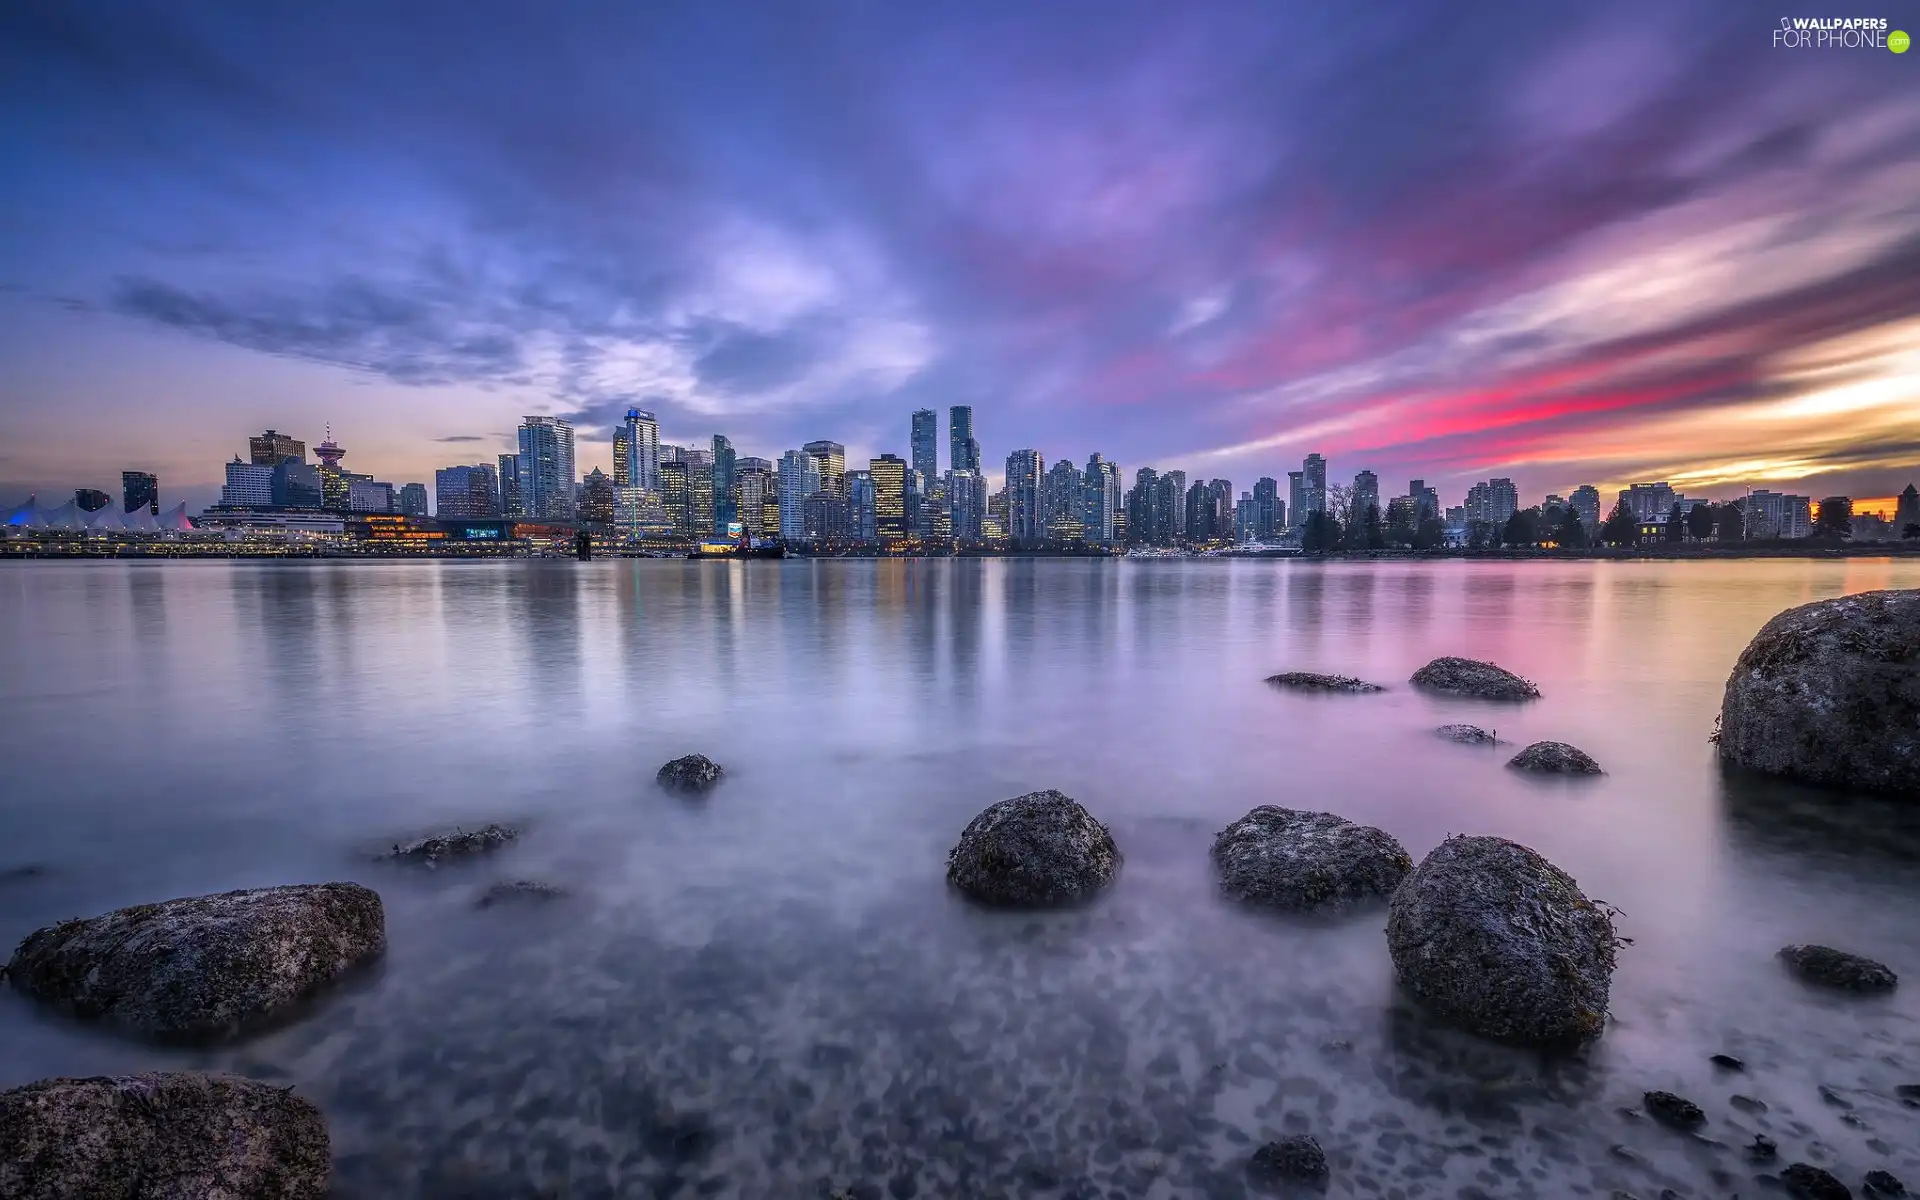 skyscrapers, Fraser River, Province of British Columbia, Stones, Vancouver, Great Sunsets, Canada